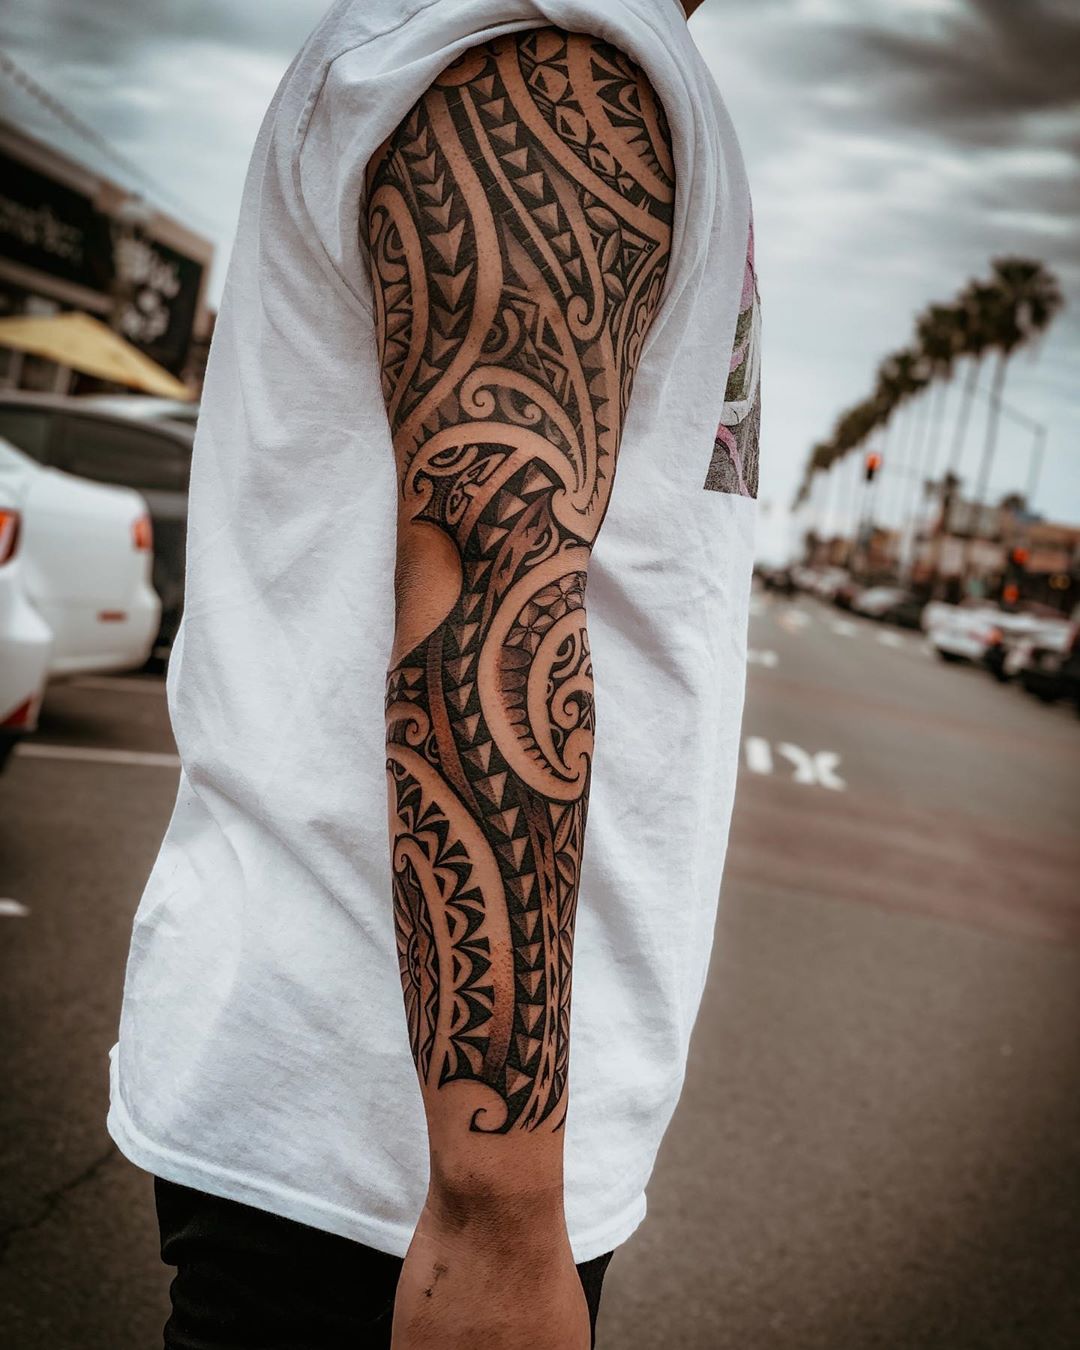 Meaning Hawaiian Tattoos: Exploring the Rich Meanings Infused into Body Ink